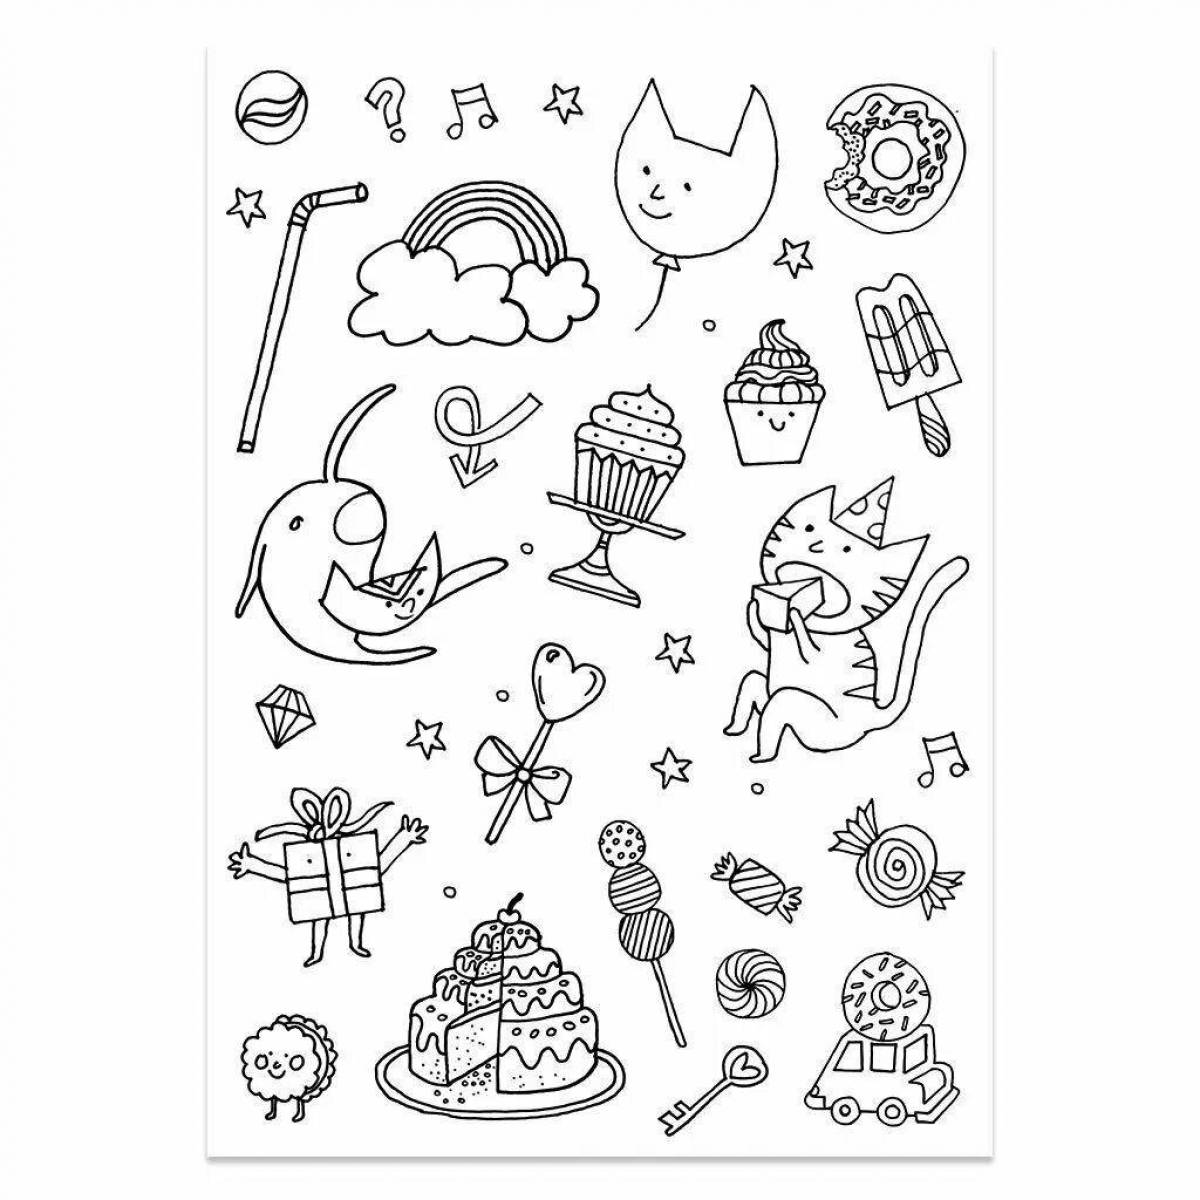 Live stickers for coloring pages